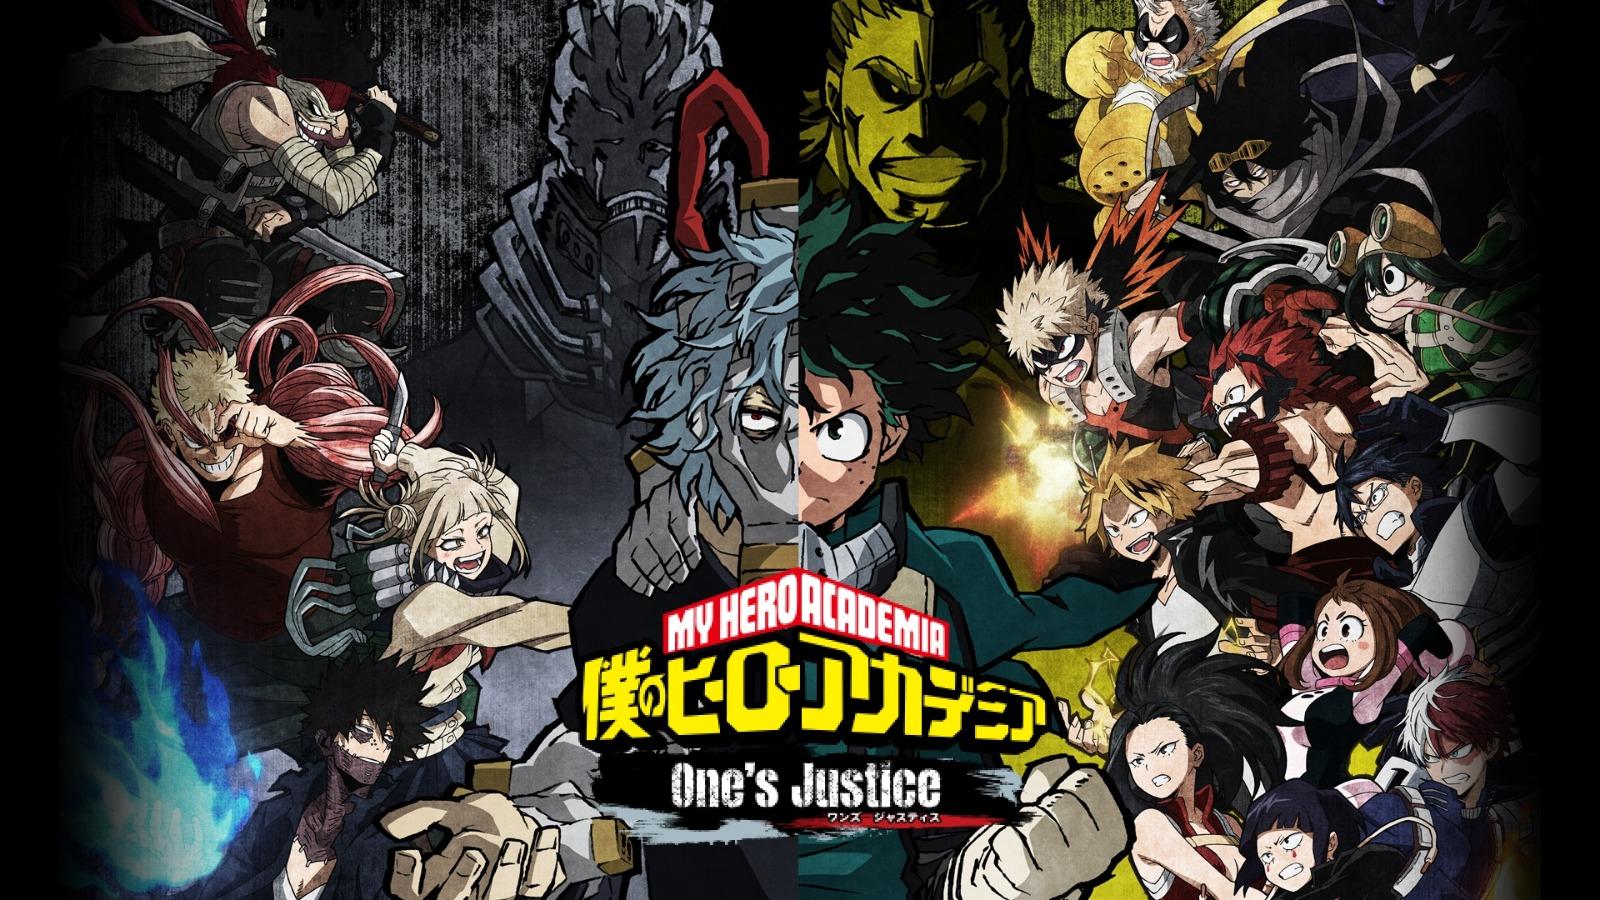 My Hero One's Justice Let's talk about video games